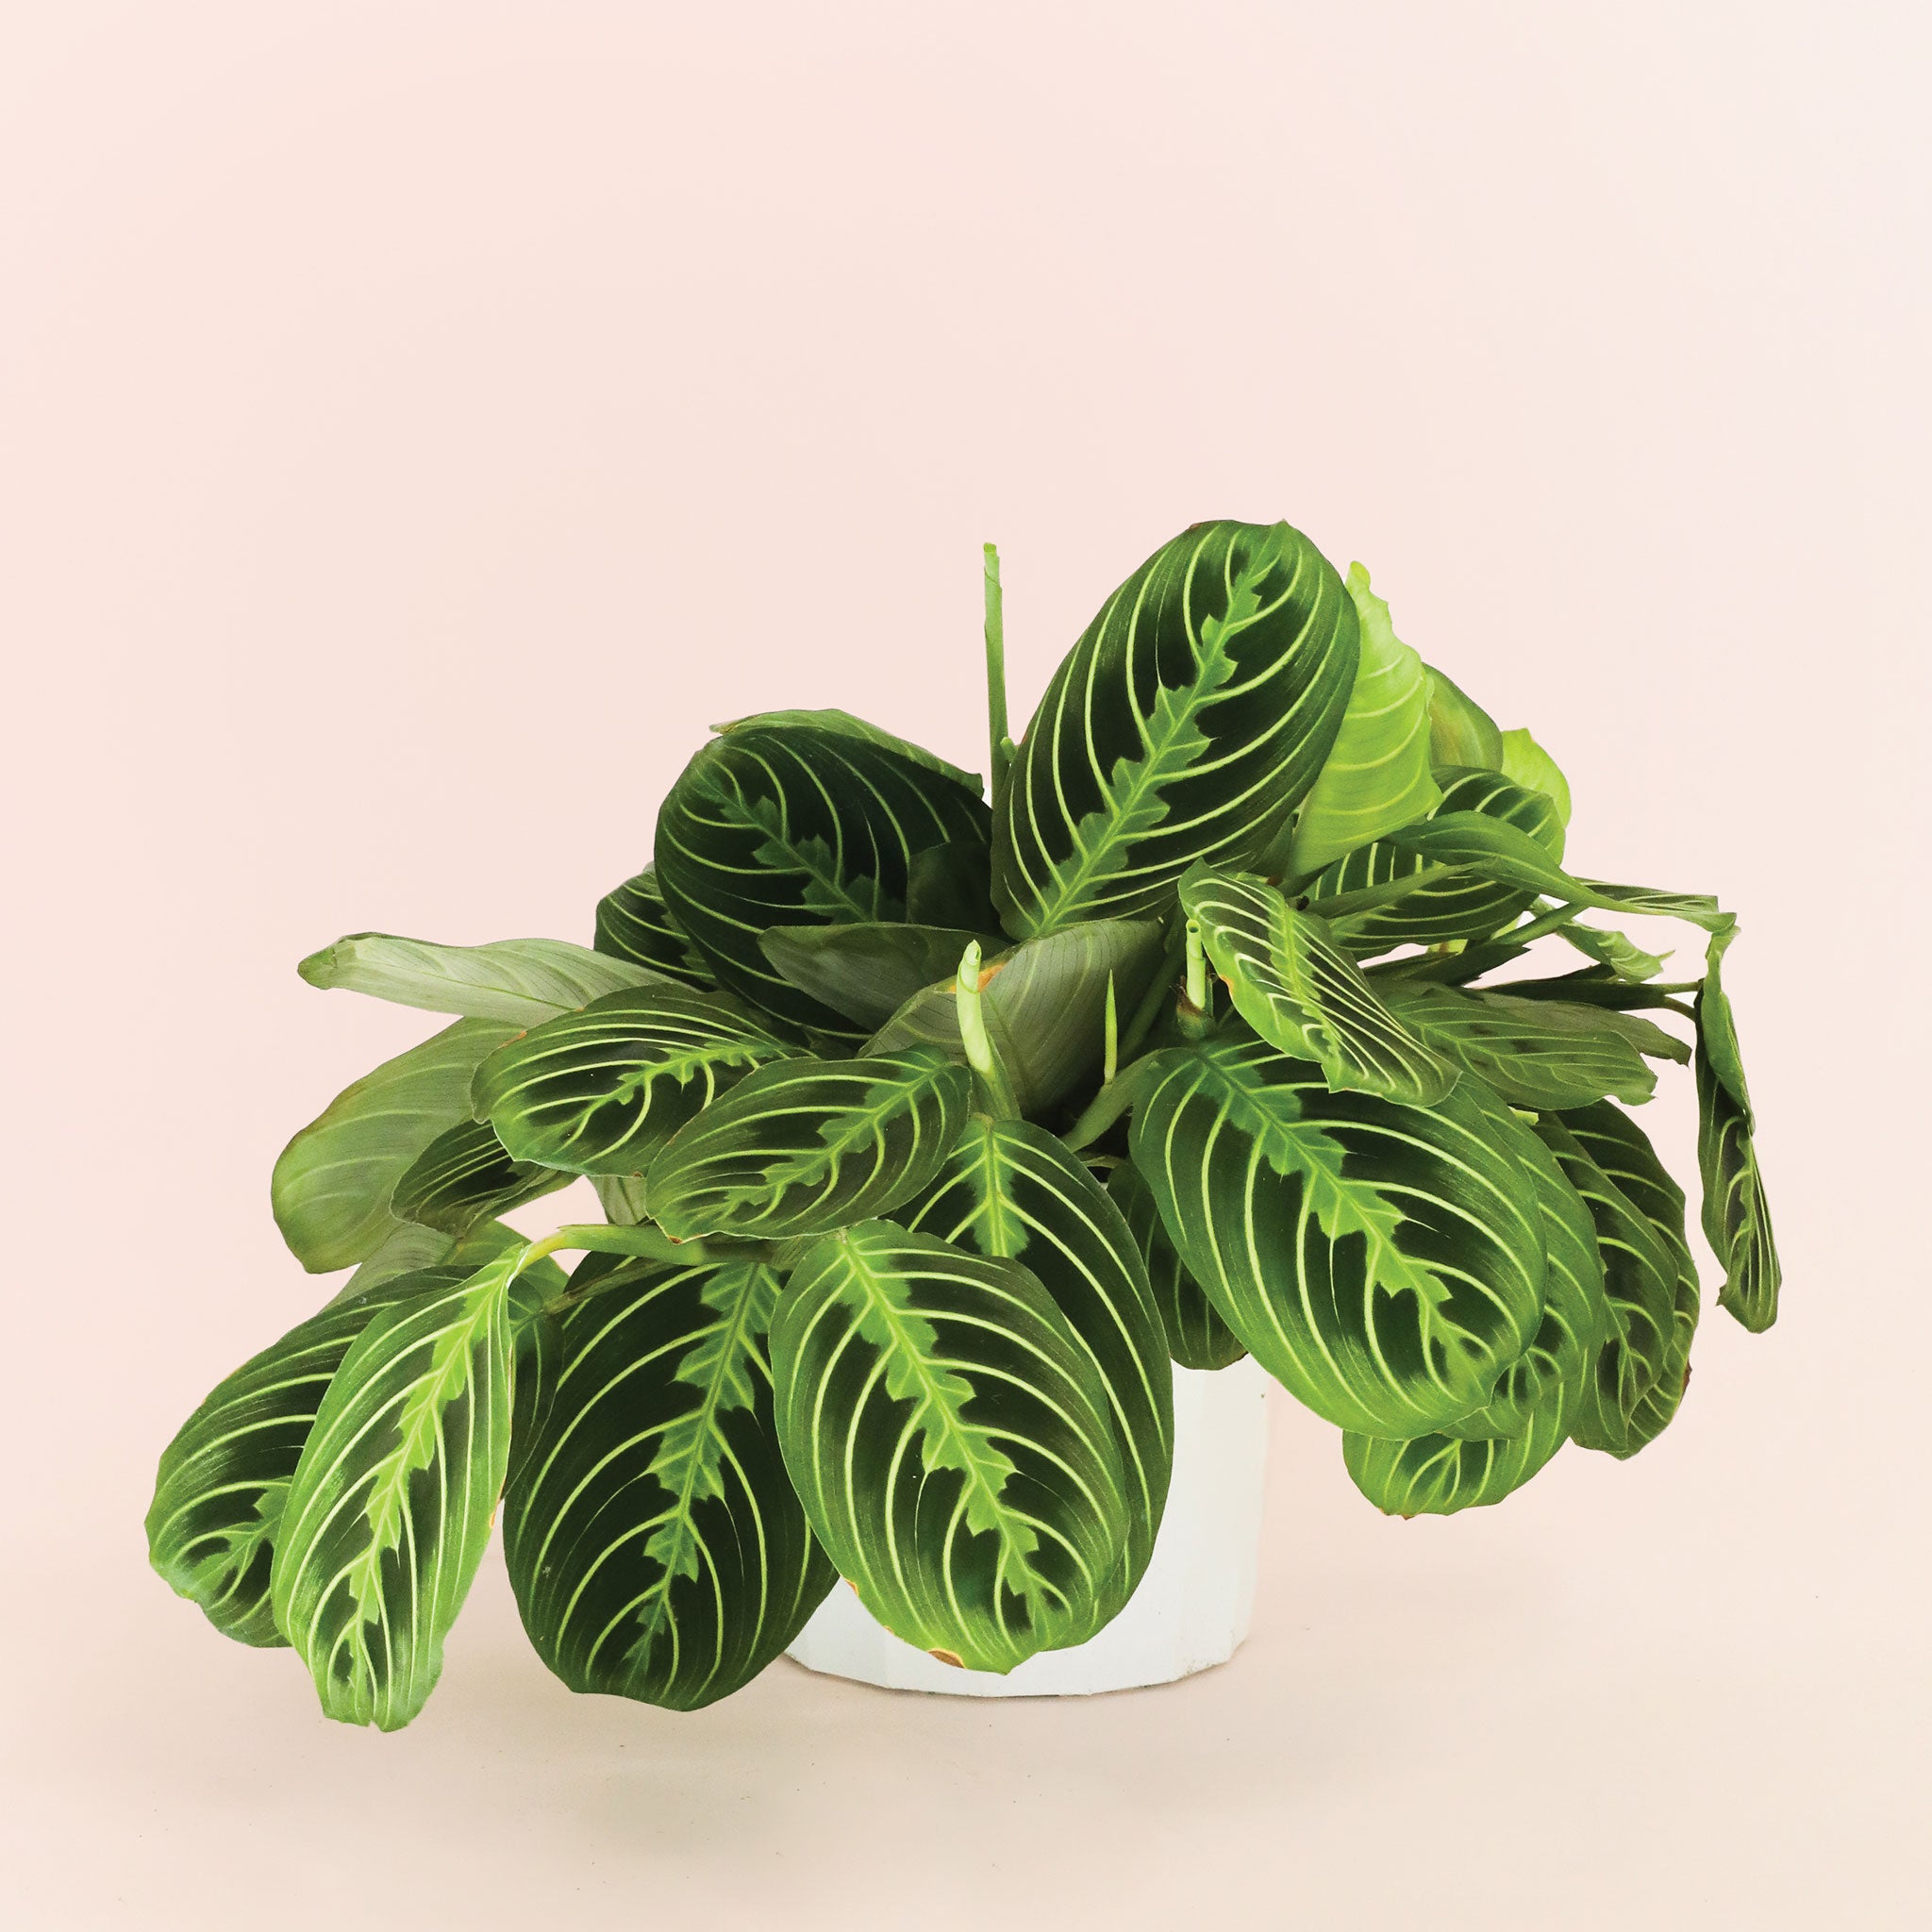 a lush green plant with shades of green to lime green featuring a striped patten on its leaves. 